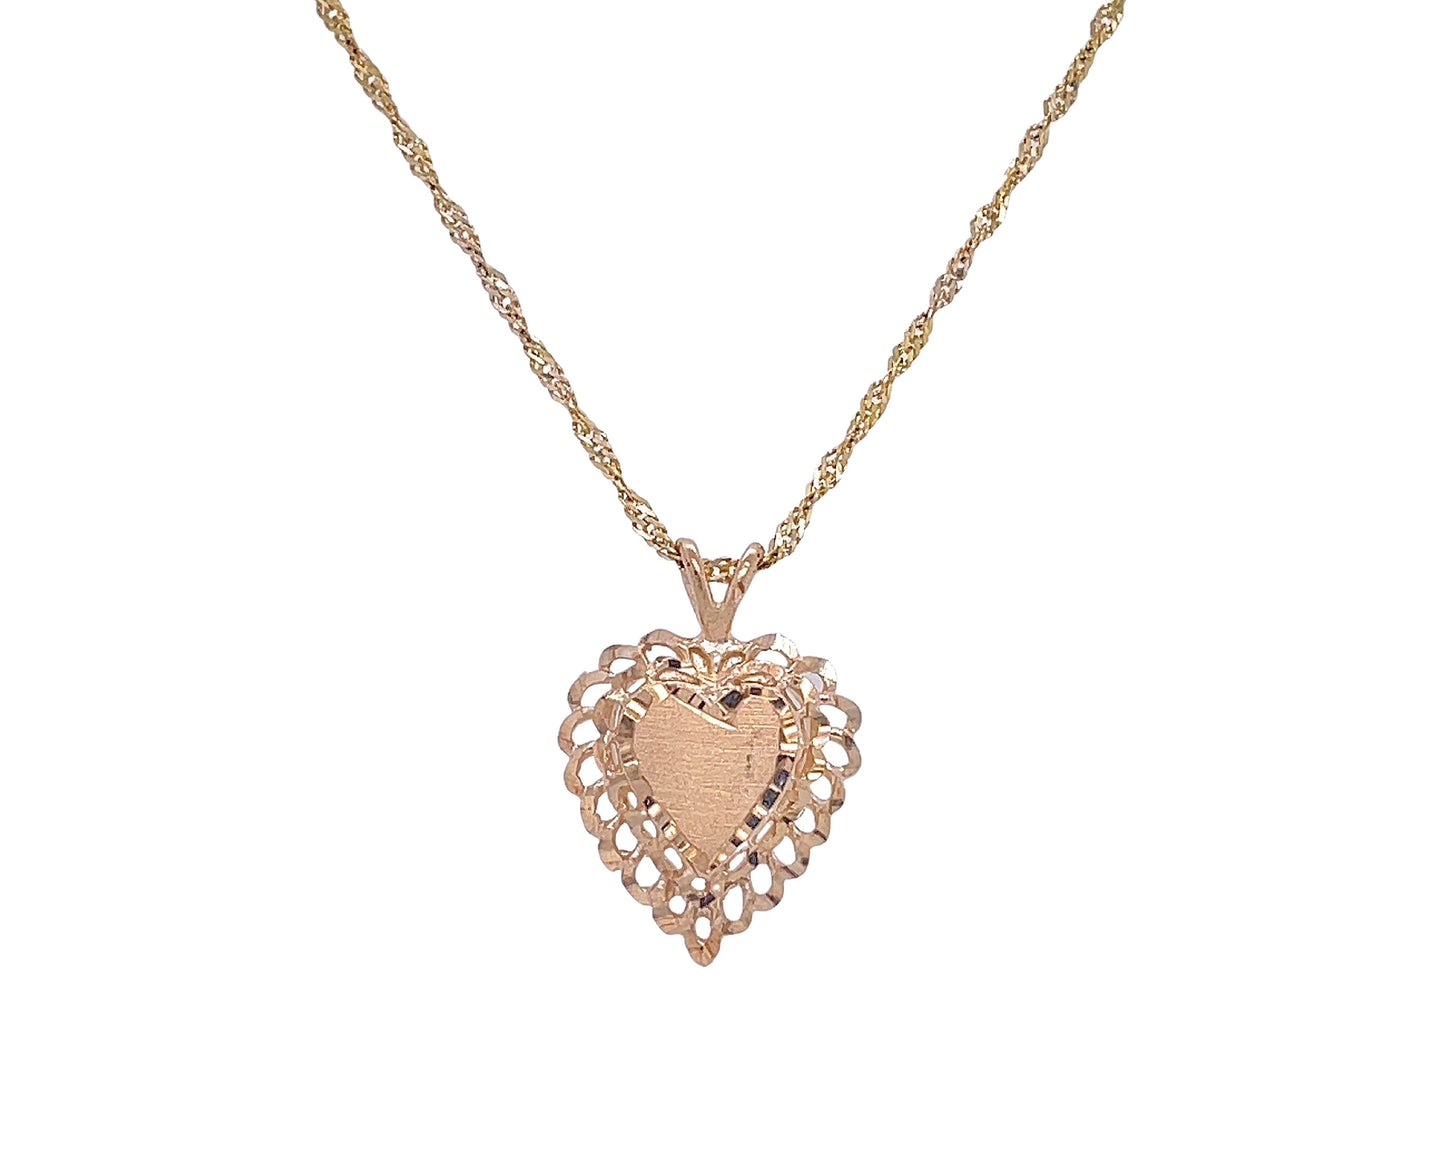 10K Yellow Gold Engravable Heart Charm With Chain